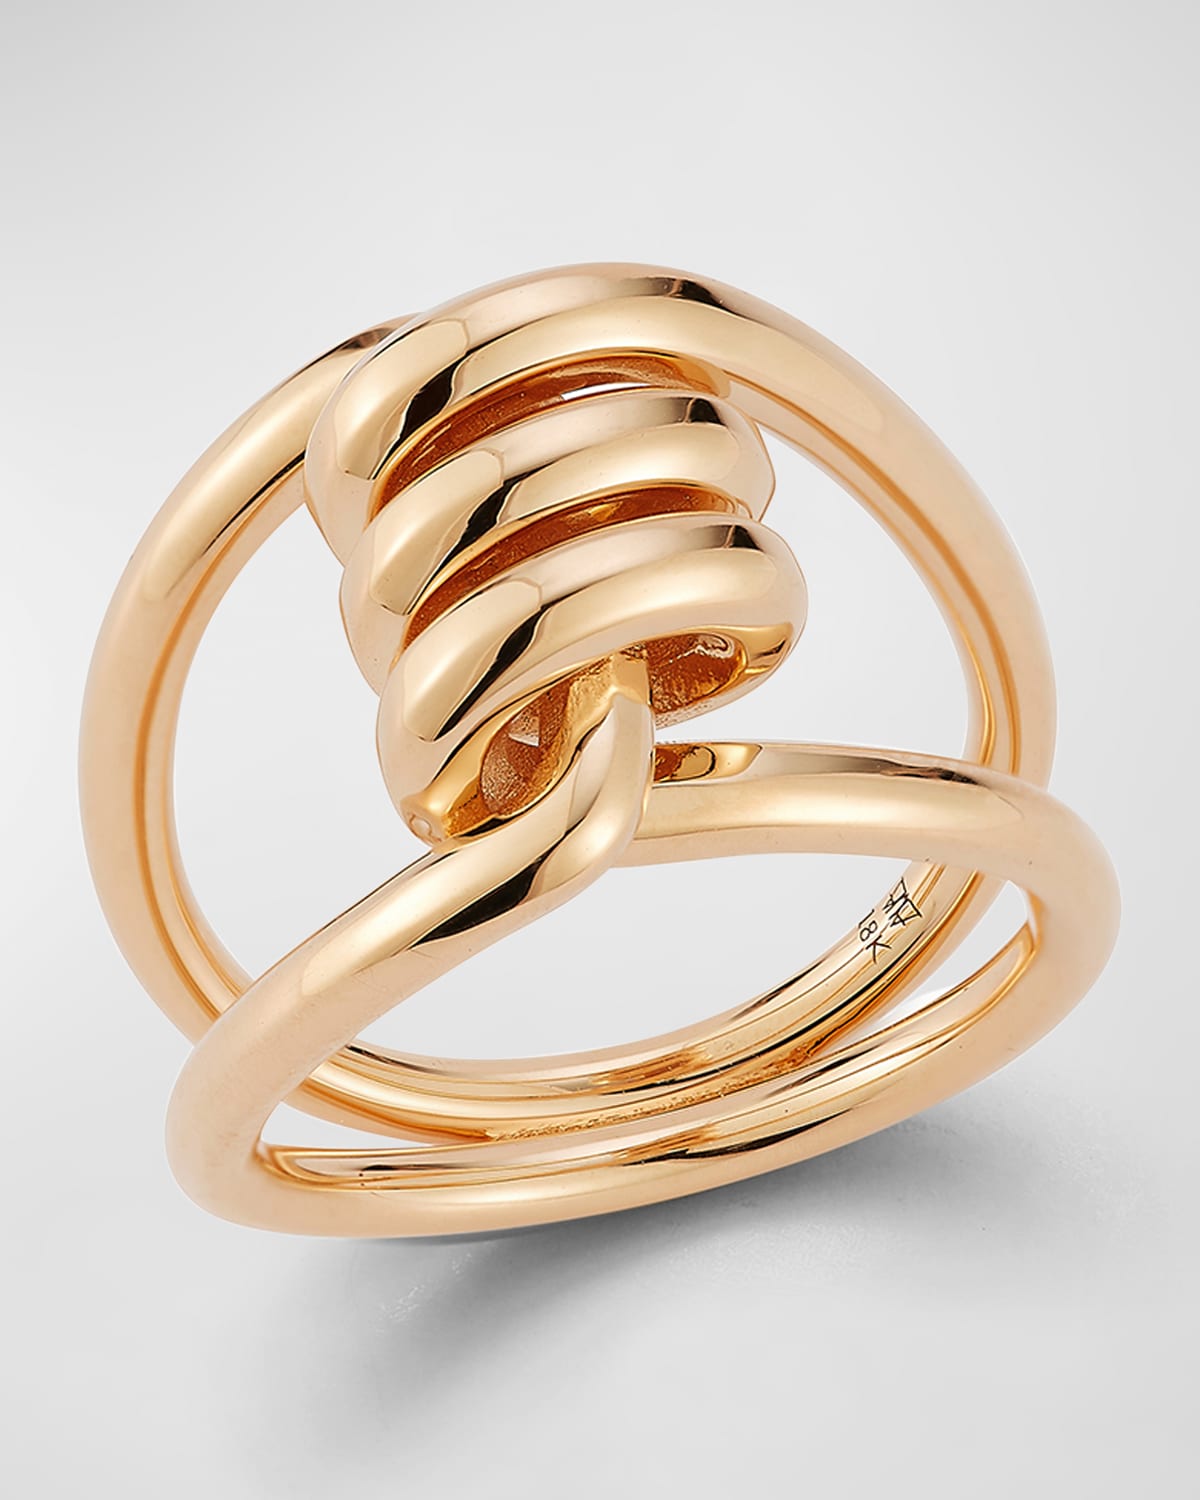 Walters Faith Huxley 18k Rose Gold Single Coil Link Ring